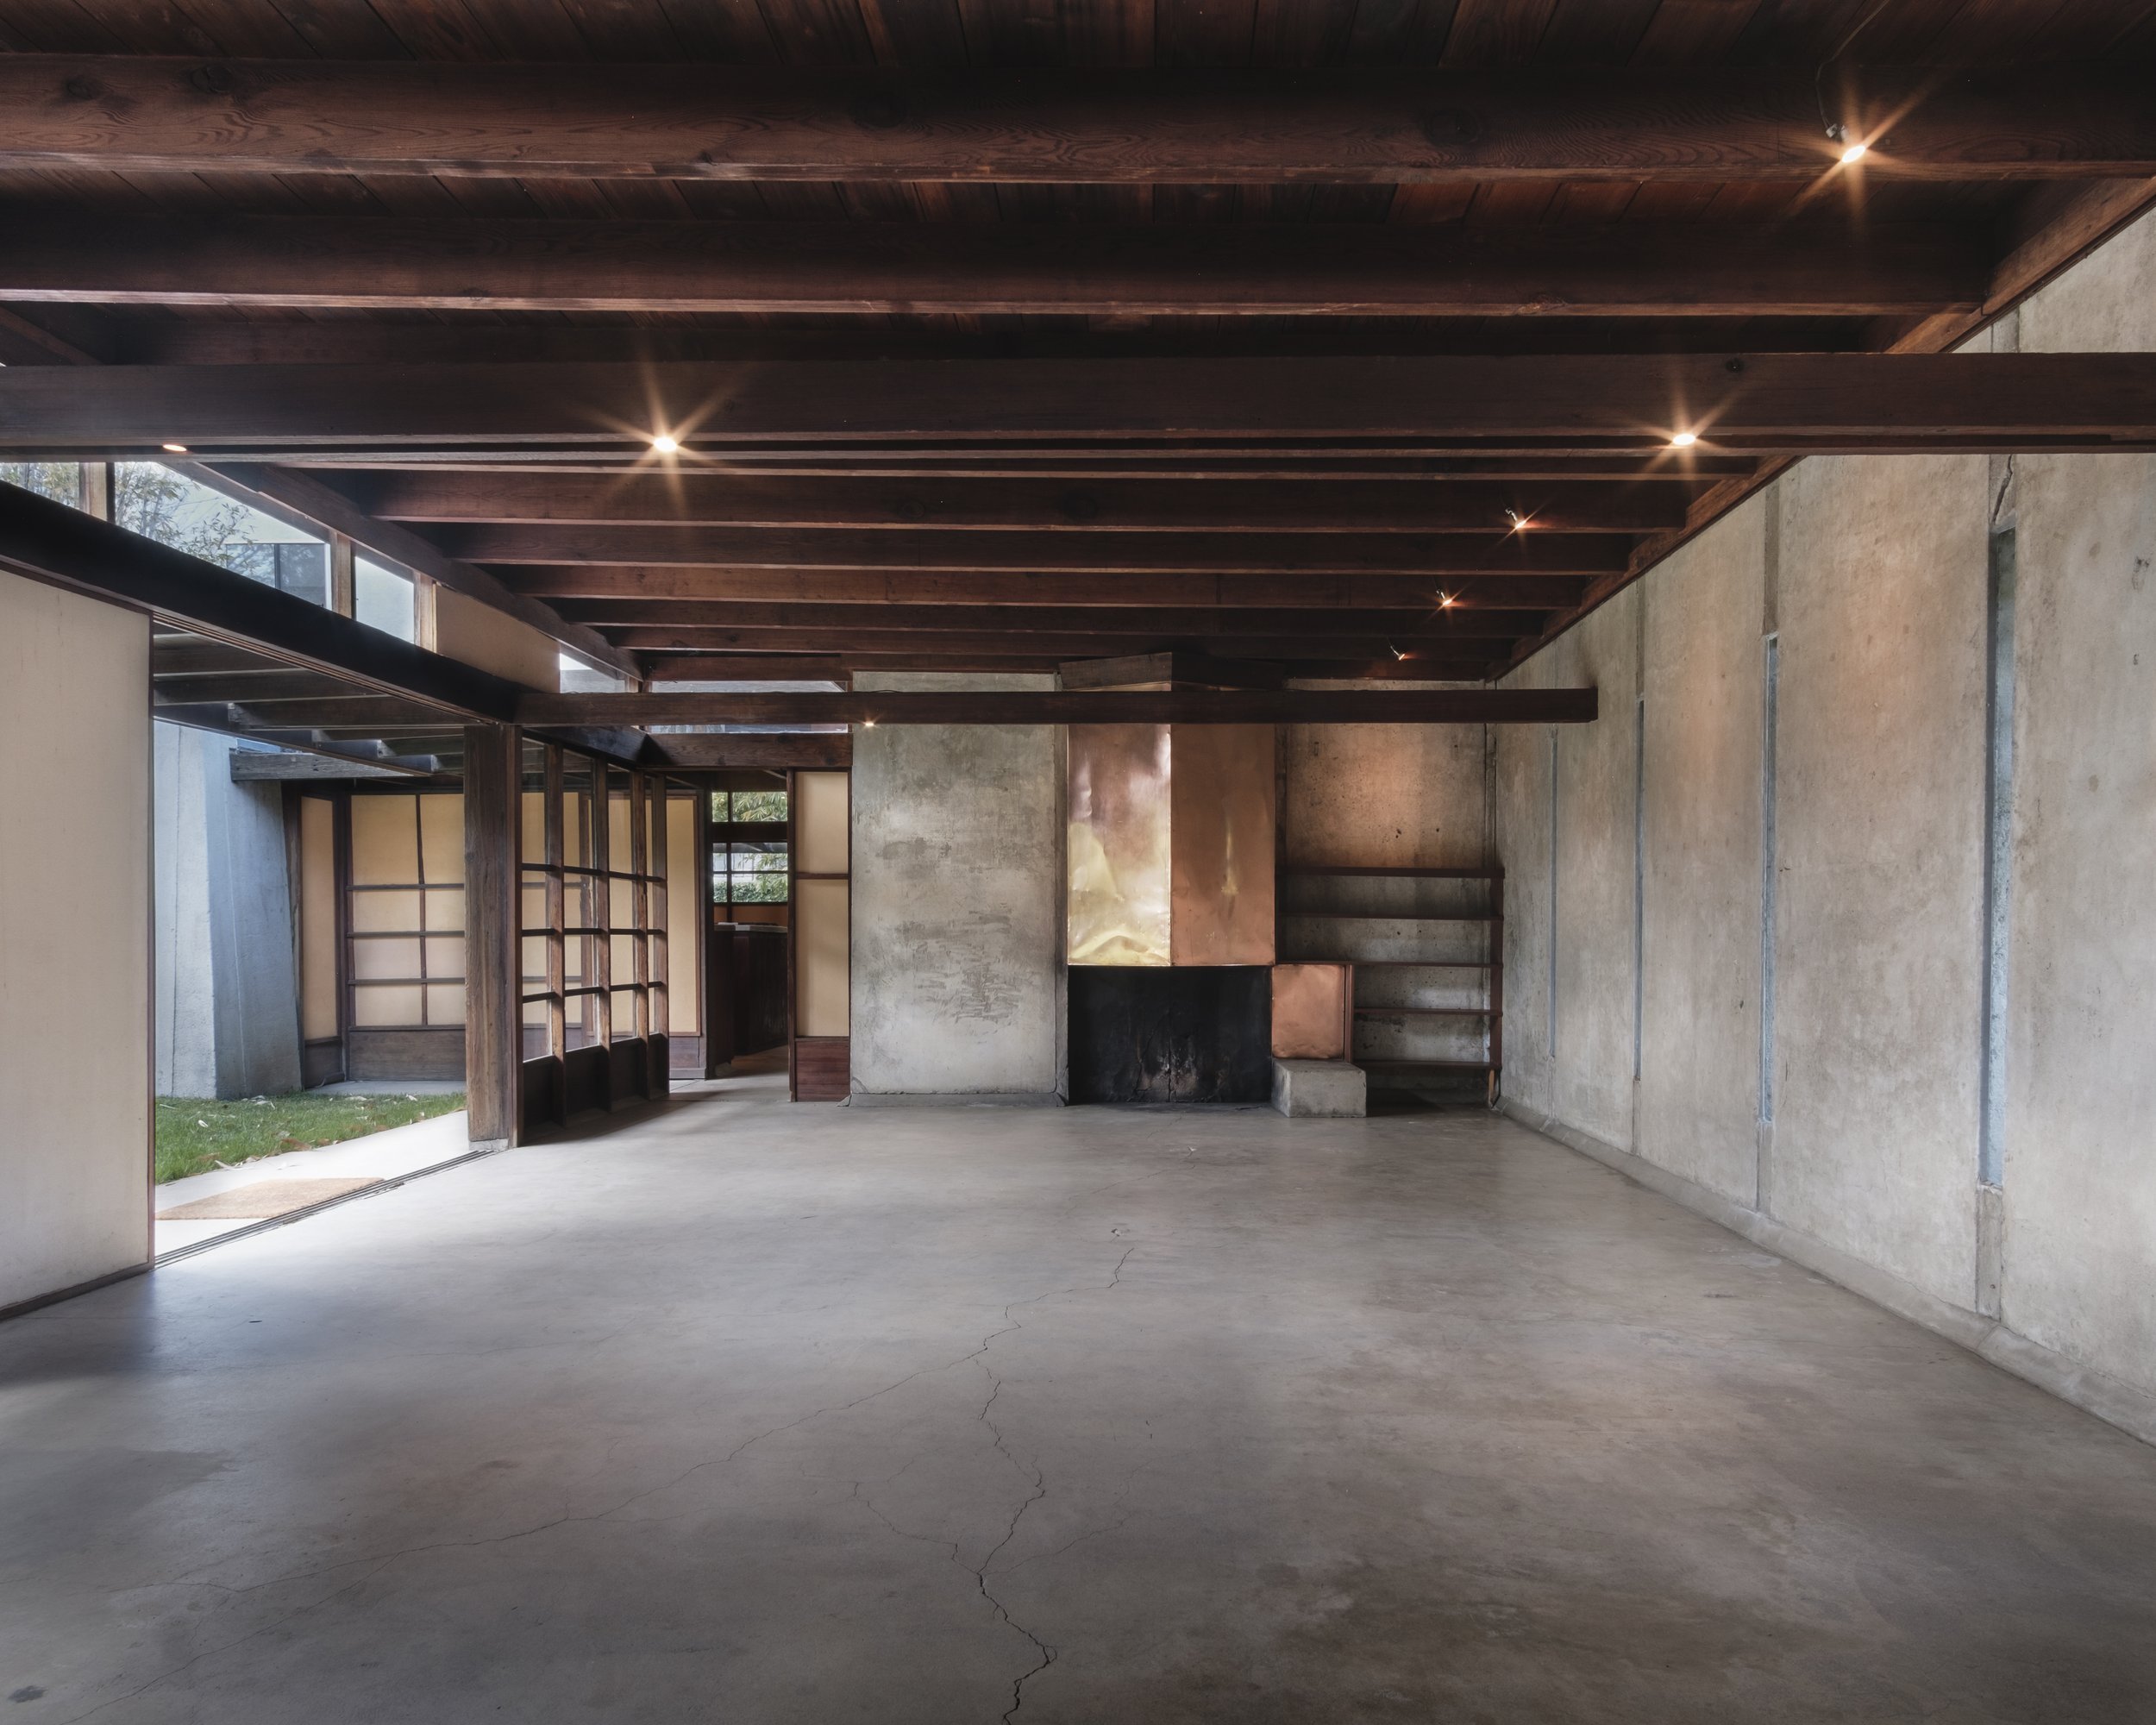 The Schindler House Polished Concrete Floors - Liviang Room Concrete Floor - Rudolph Schindler